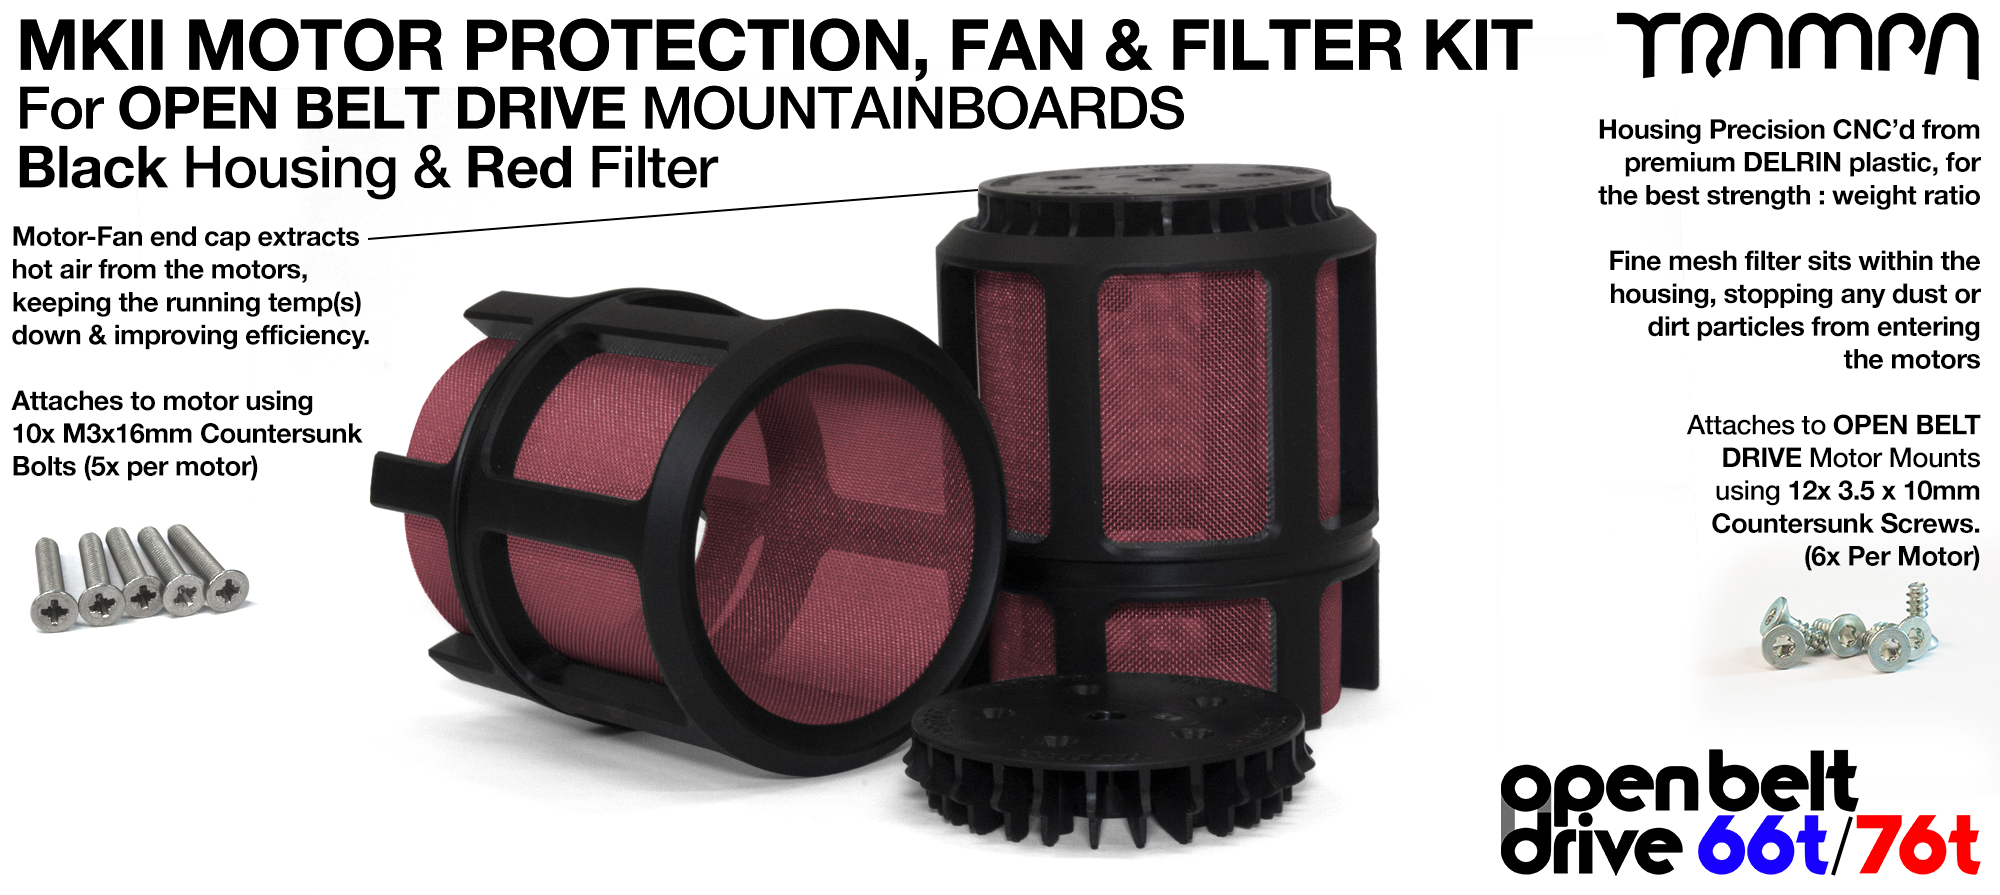 FULL Cage Motor Protection - RED 